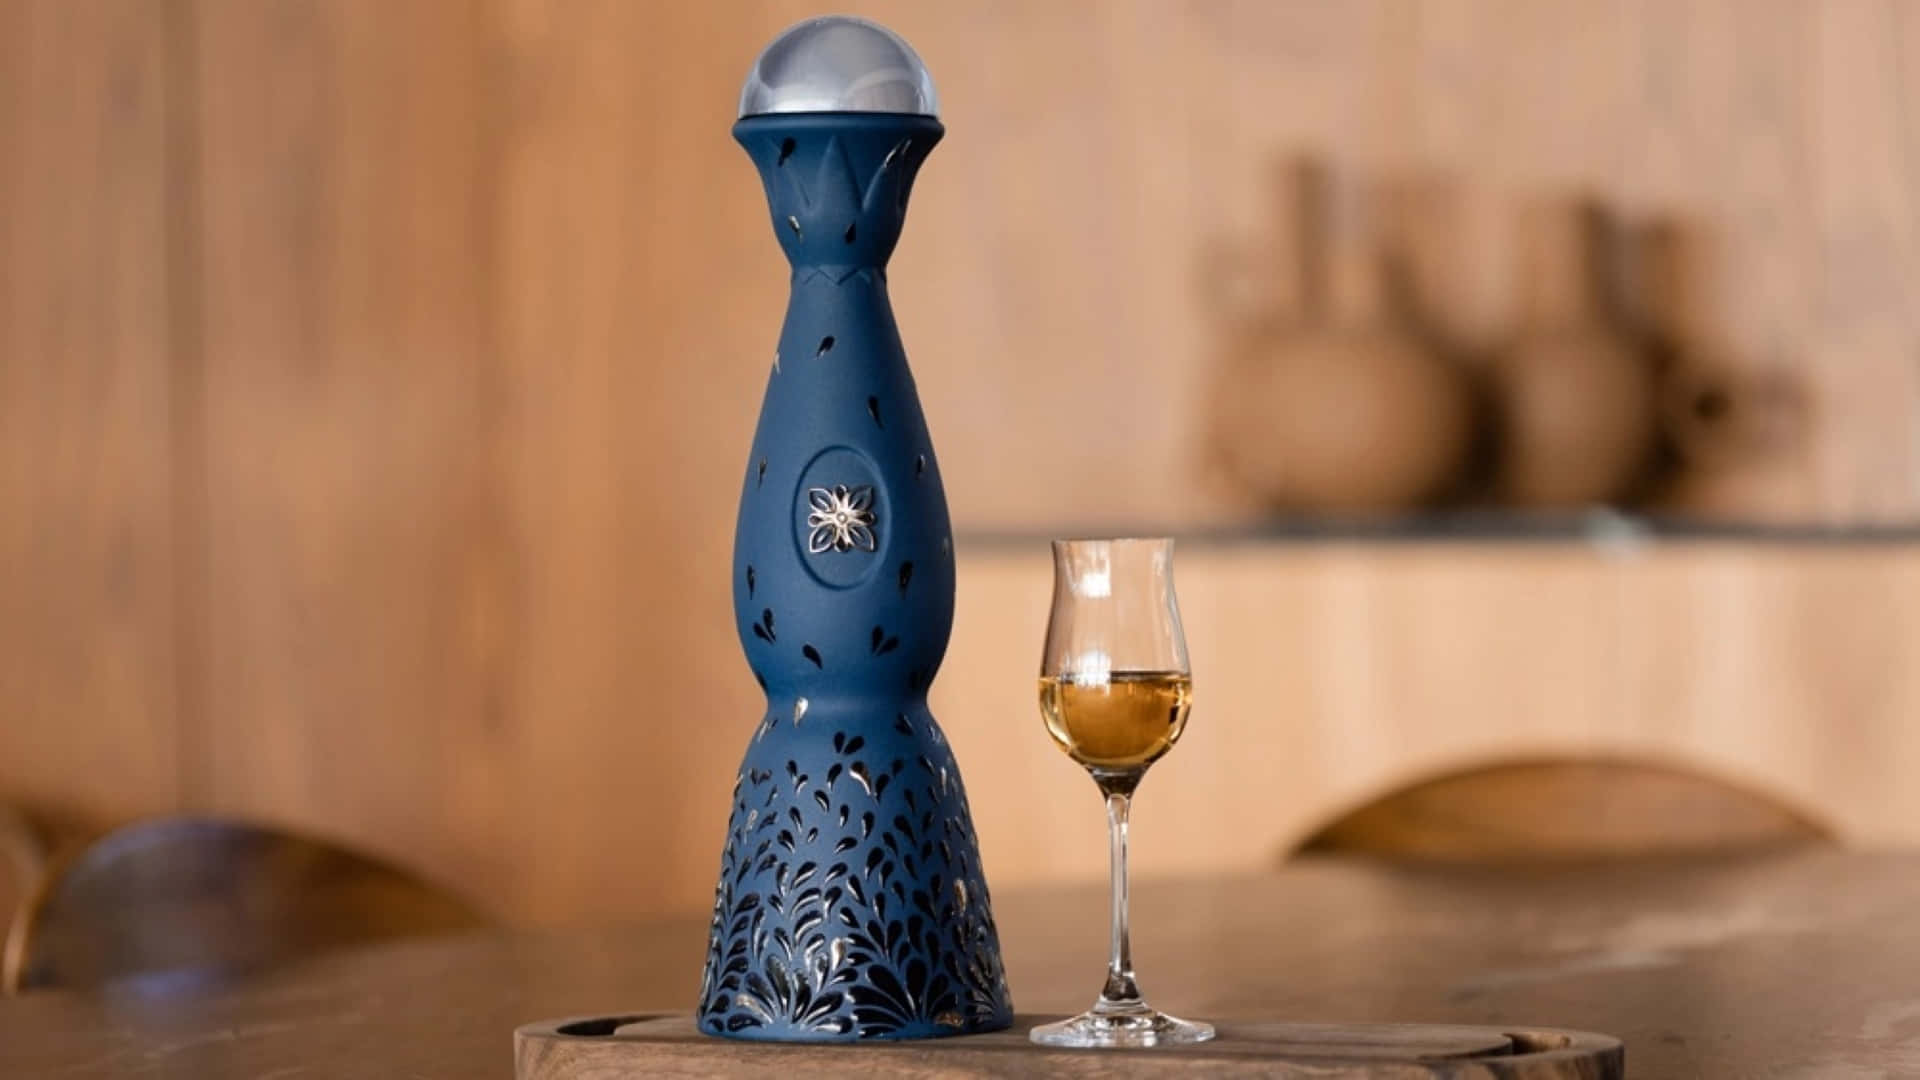 25th Anniversary Limited Edition Clase Azul Bottle Wallpaper